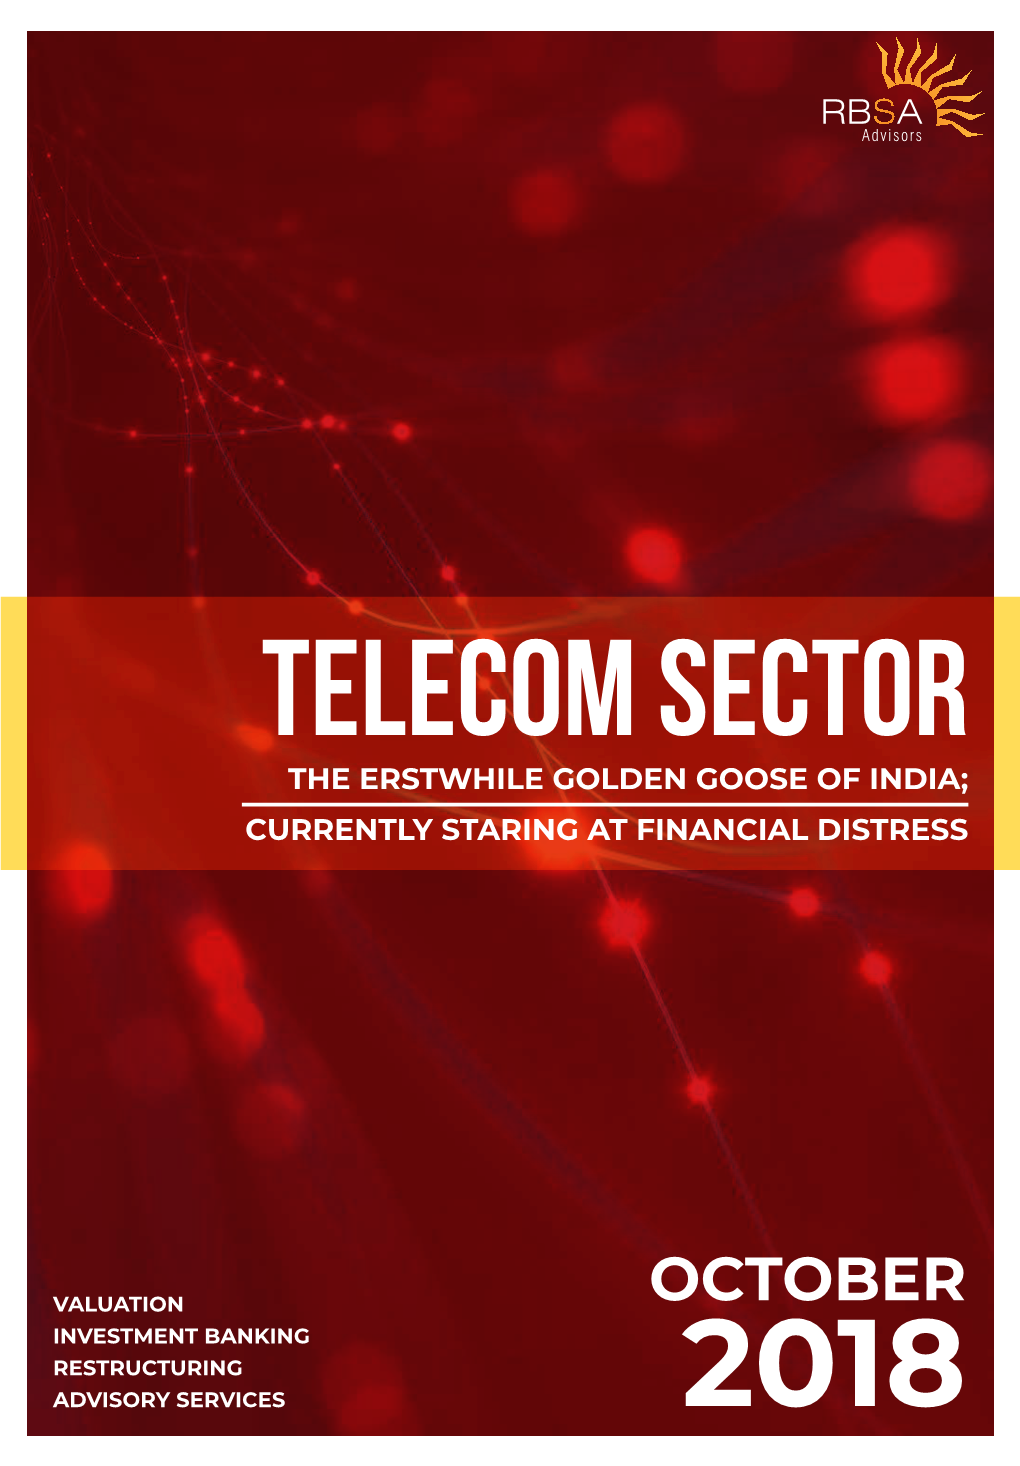 Telecom Sector the Erstwhile Golden Goose of India; Currently Staring at Financial Distress